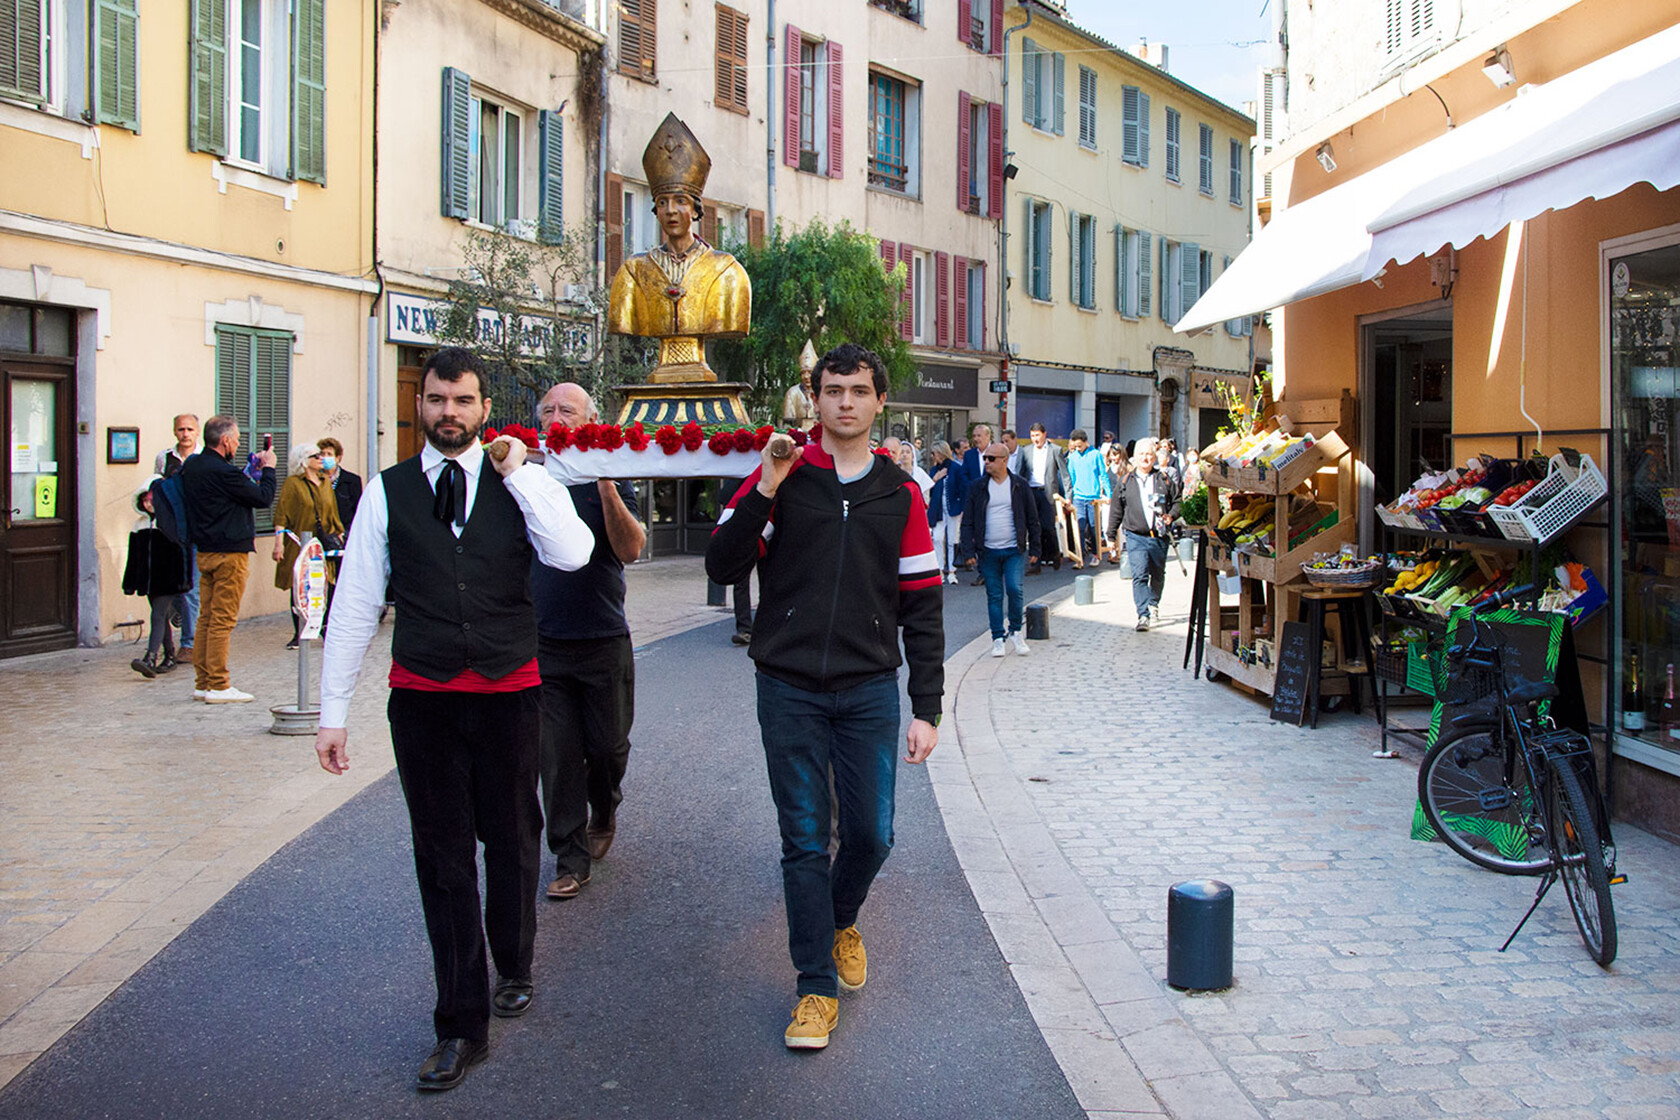 The Procession of Saint Véran and Saint Lambert in Vence